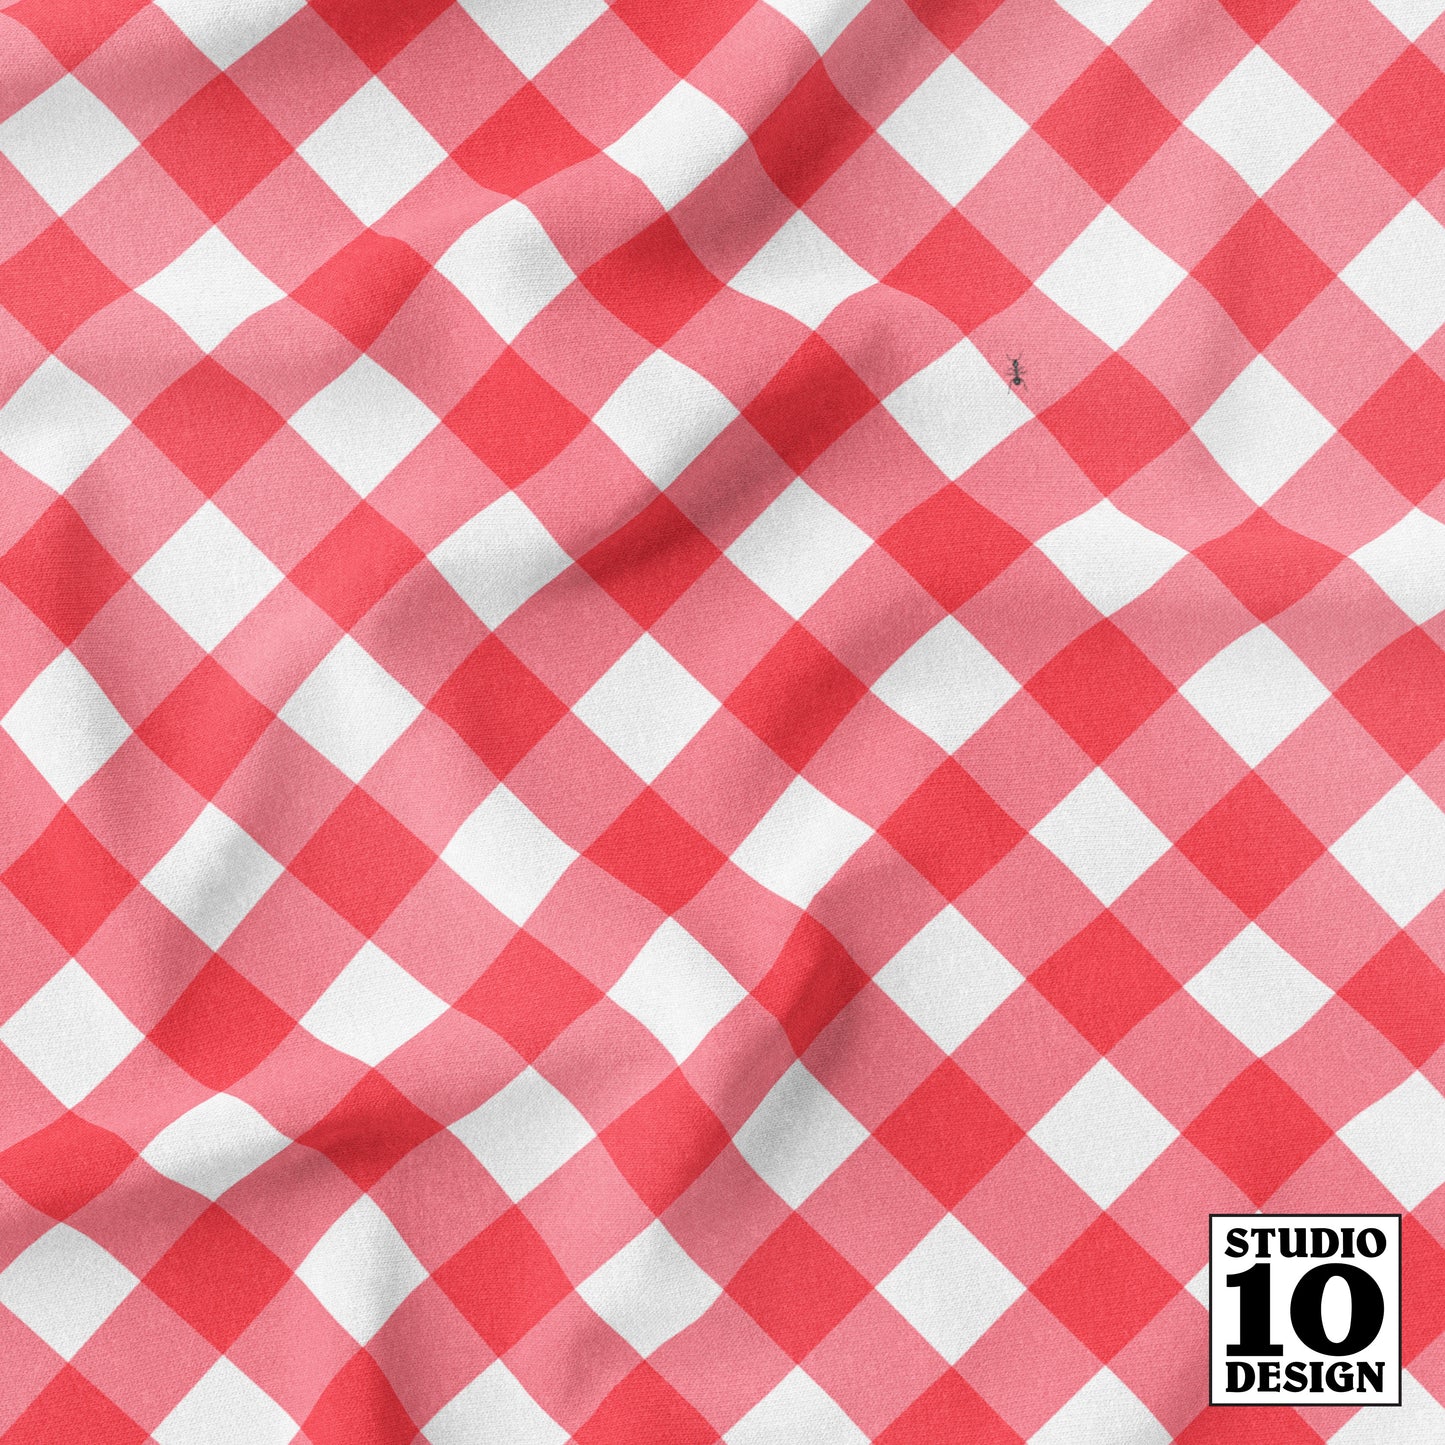 Ants at the Picnic, Red Bias Gingham Printed Fabric by Studio Ten Design